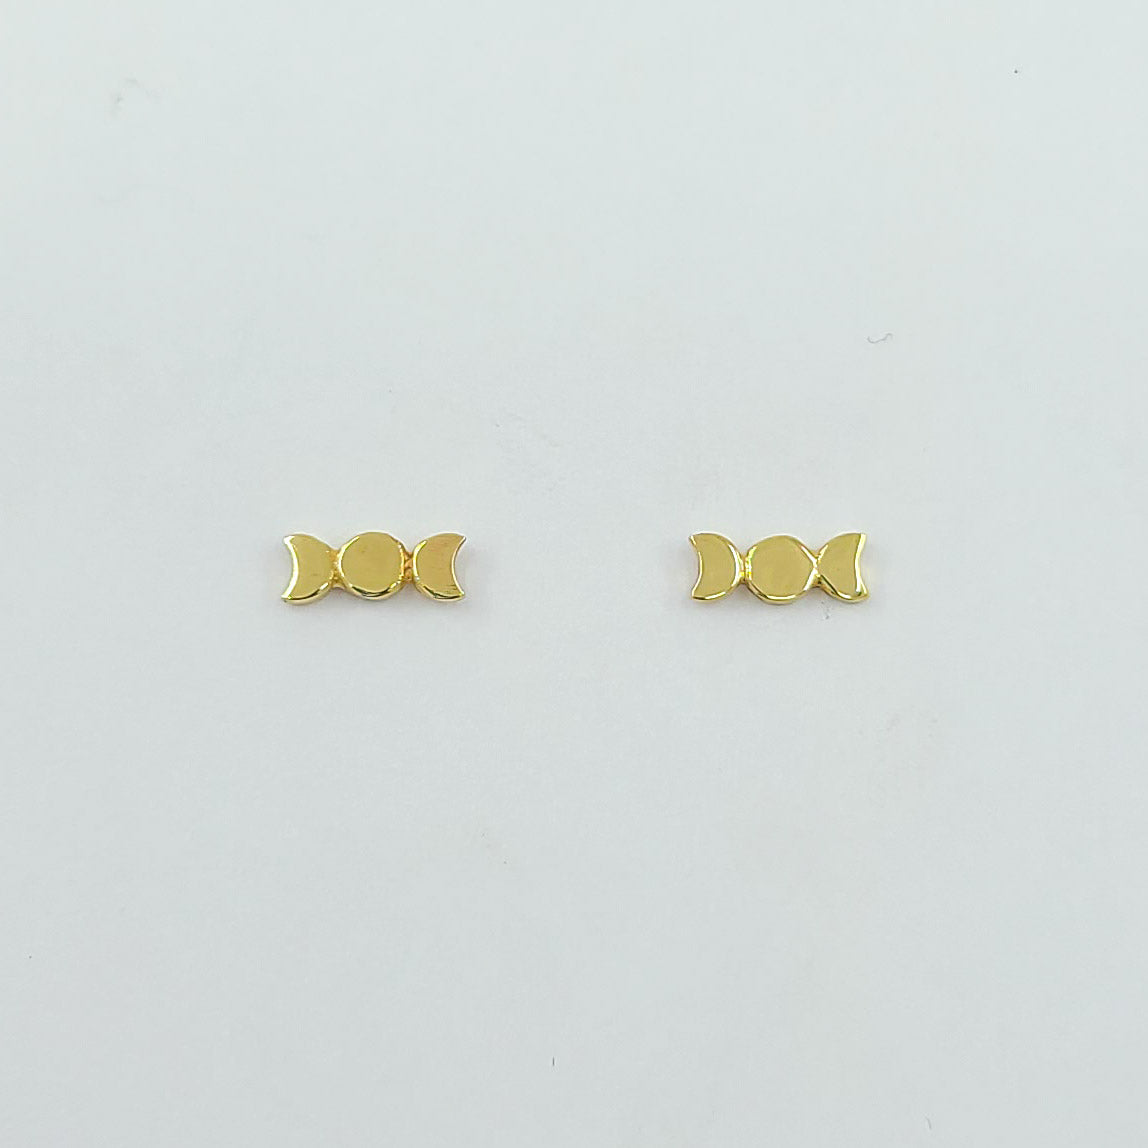 Small 10K - 14K Yellow Gold Moon Phase Earrings